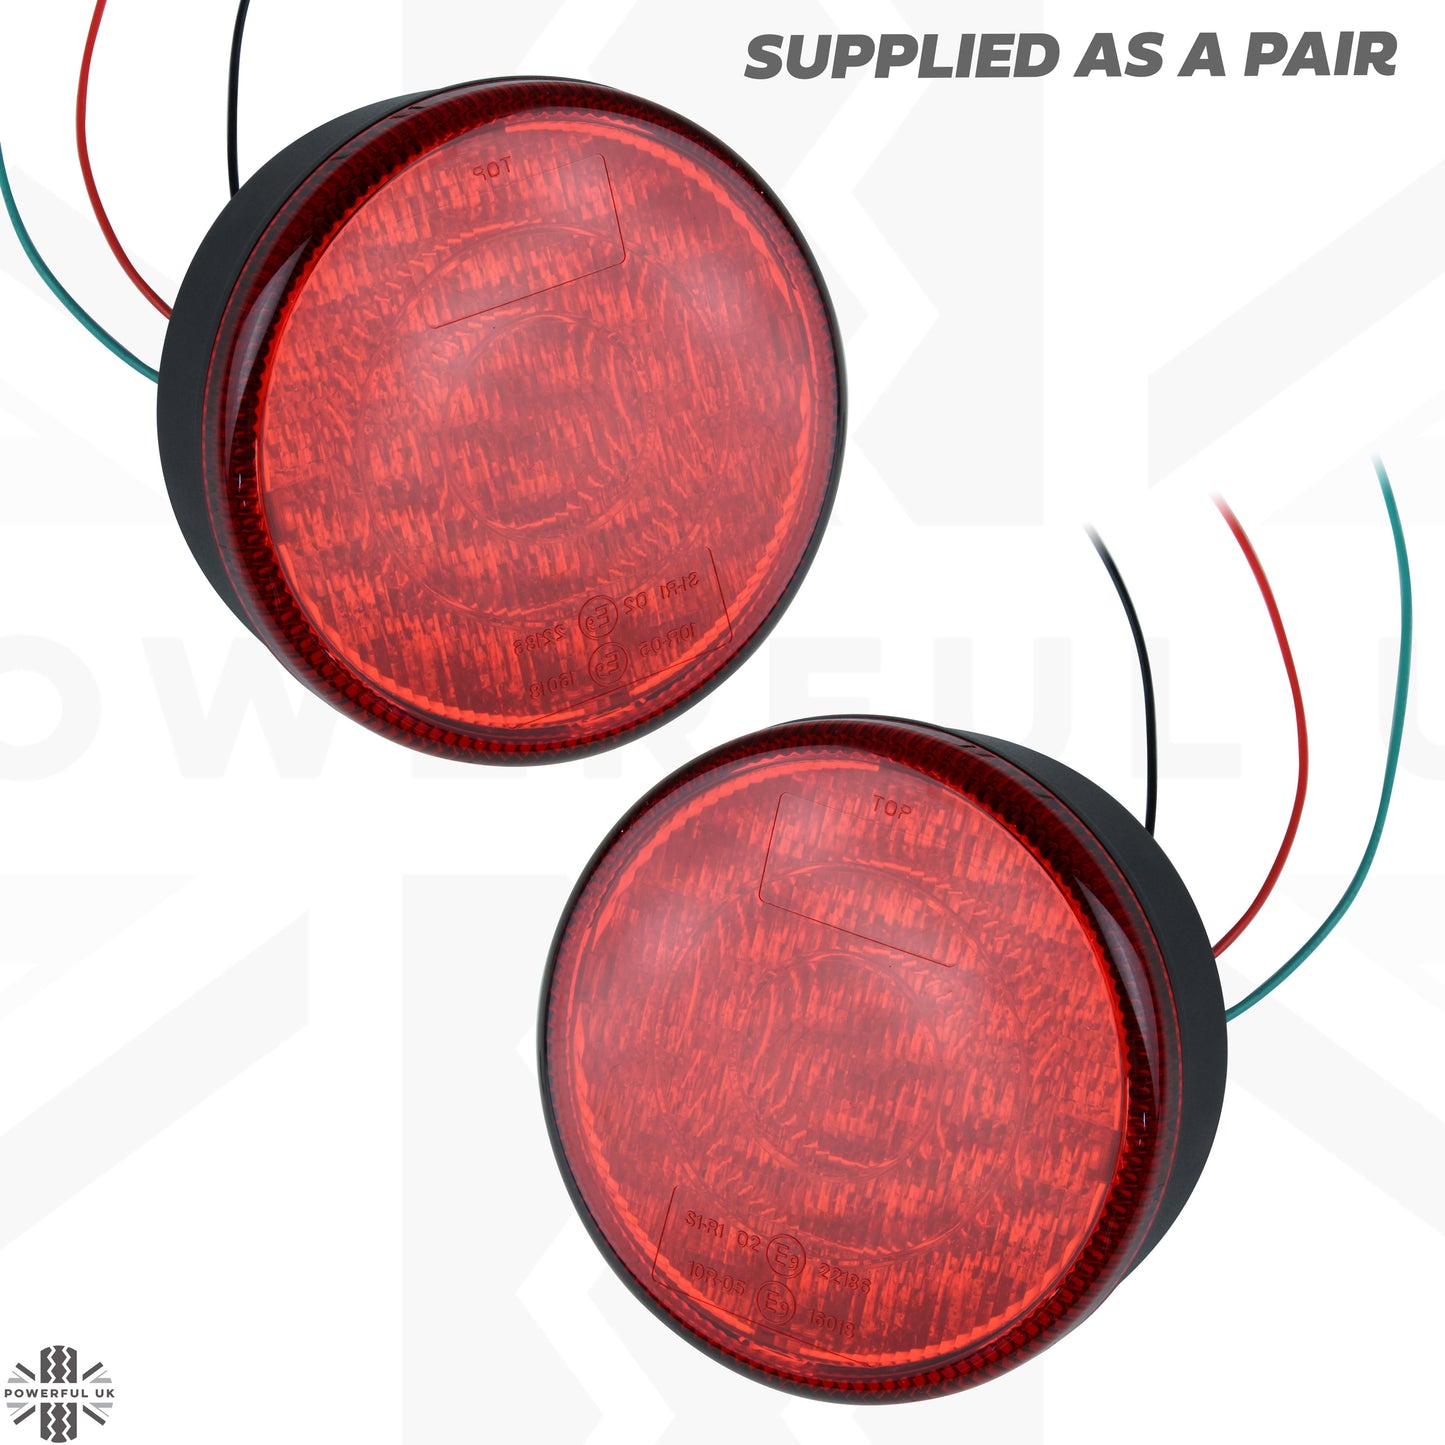 NAS Style LED Stop/Tail Lamp - 95mm for Land Rover Defender - PAIR